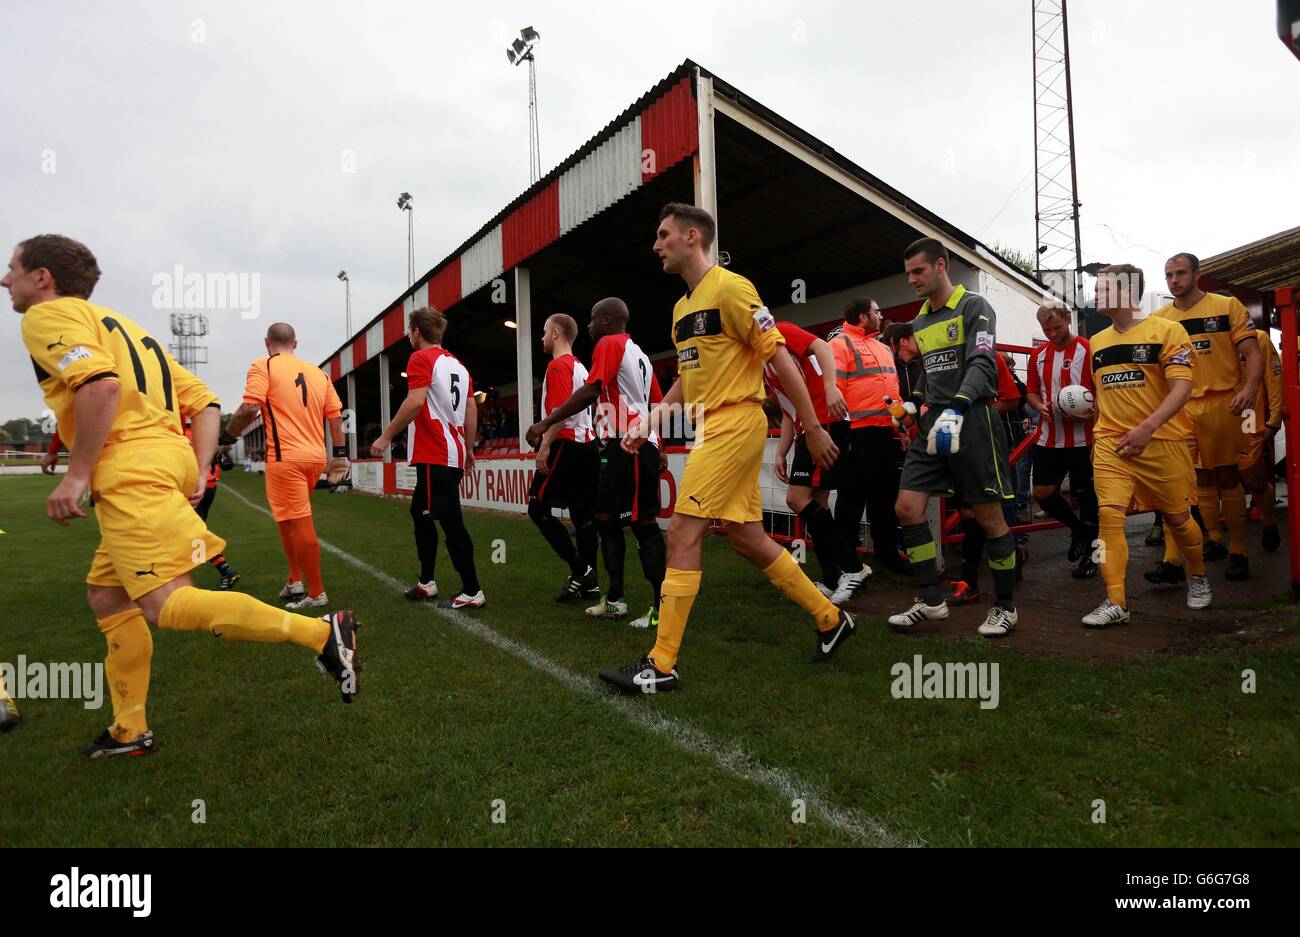 Soccer - FA Cup Qualifying - Third Round - Atherstone Town v Barrow - Sheepy Road. Atherstone Town and Barrow take the field for the FA Cup Qualifying, Third Round match at Sheepy Road, Atherstone. Stock Photo